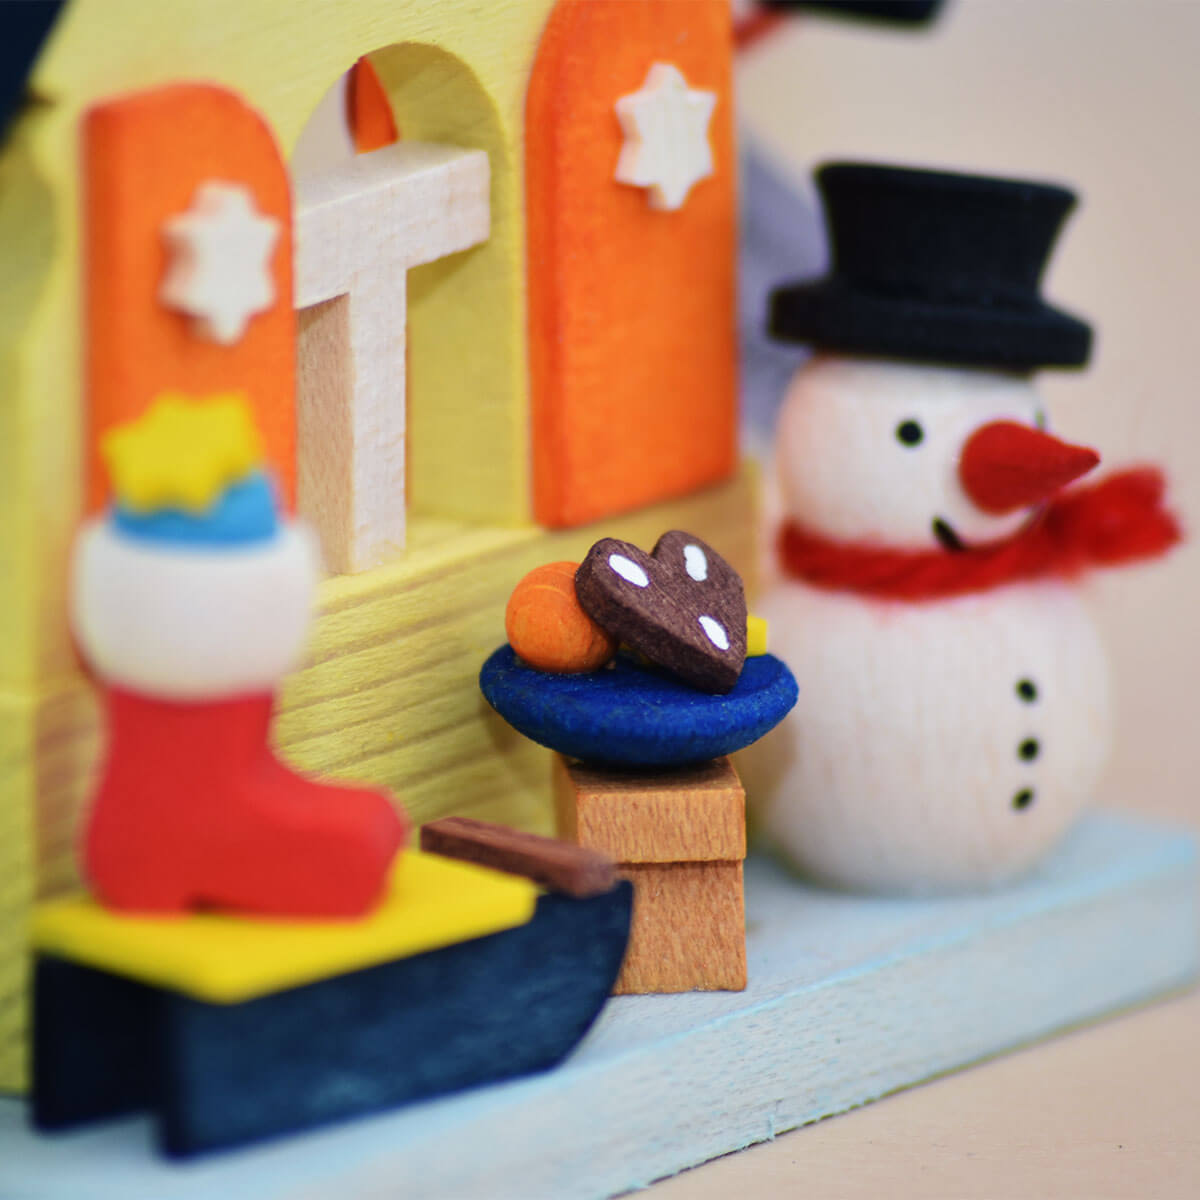 House 'Snowman' Ornament with animals